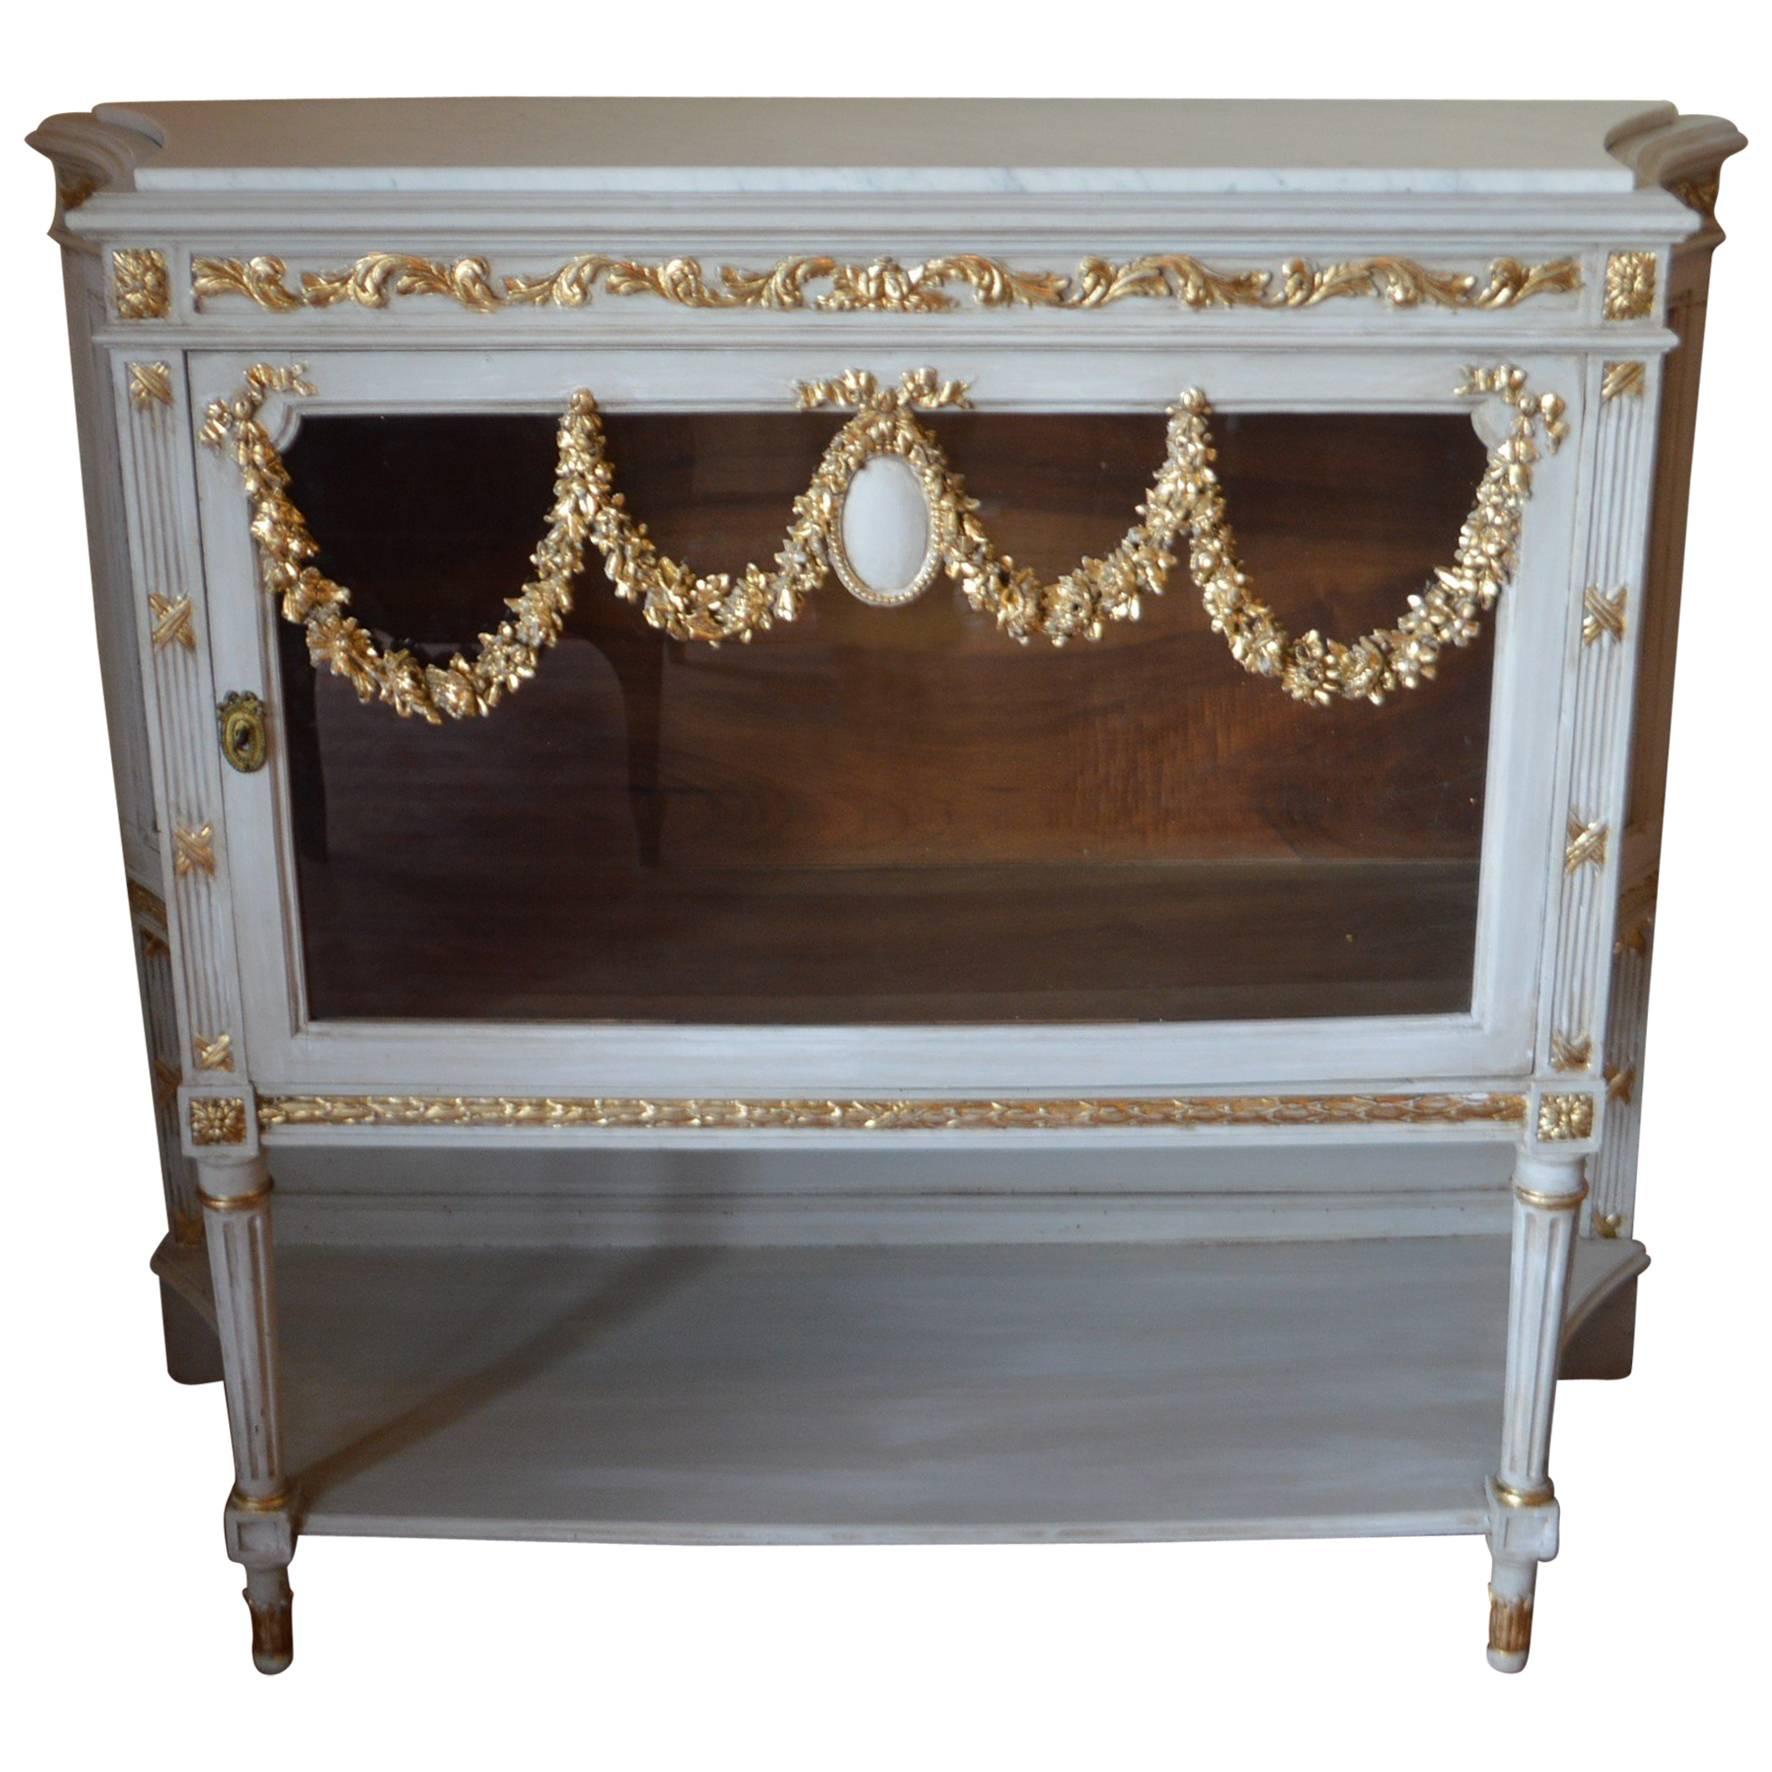 Louis XVI Style Painted Cabinet with Glass Door, Gilded Details, Marble Top